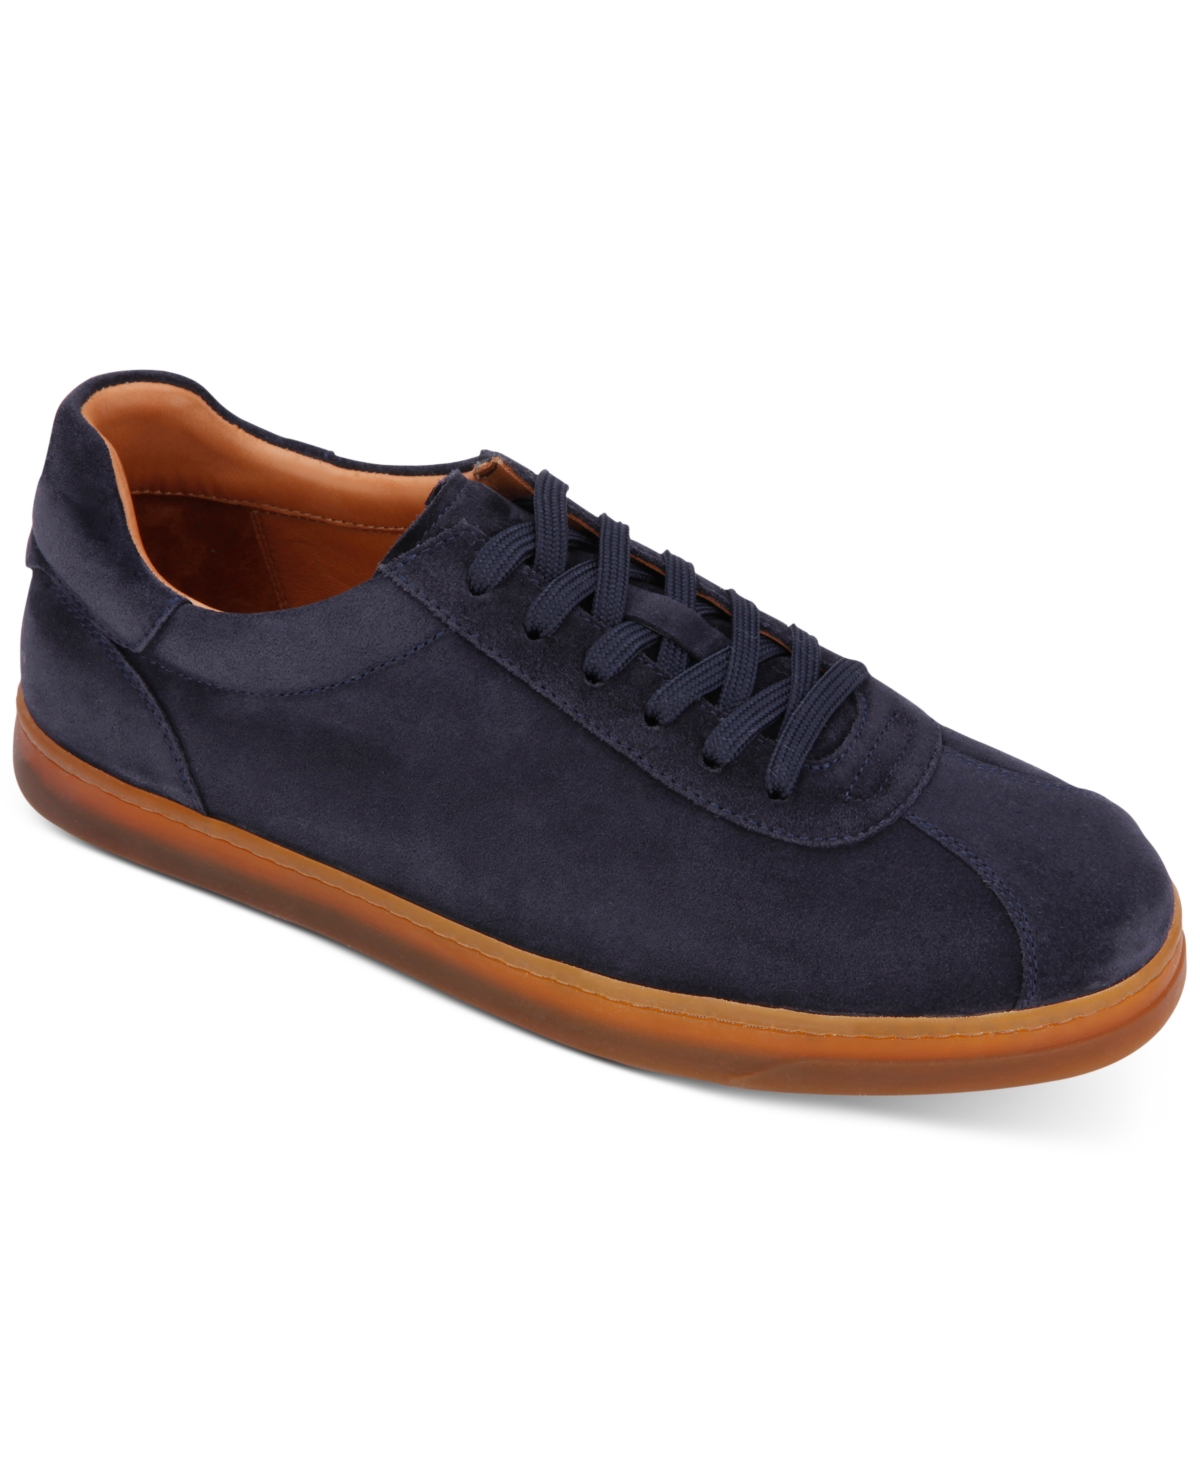 Men's Nyle Lace-Up Sneakers - Navy